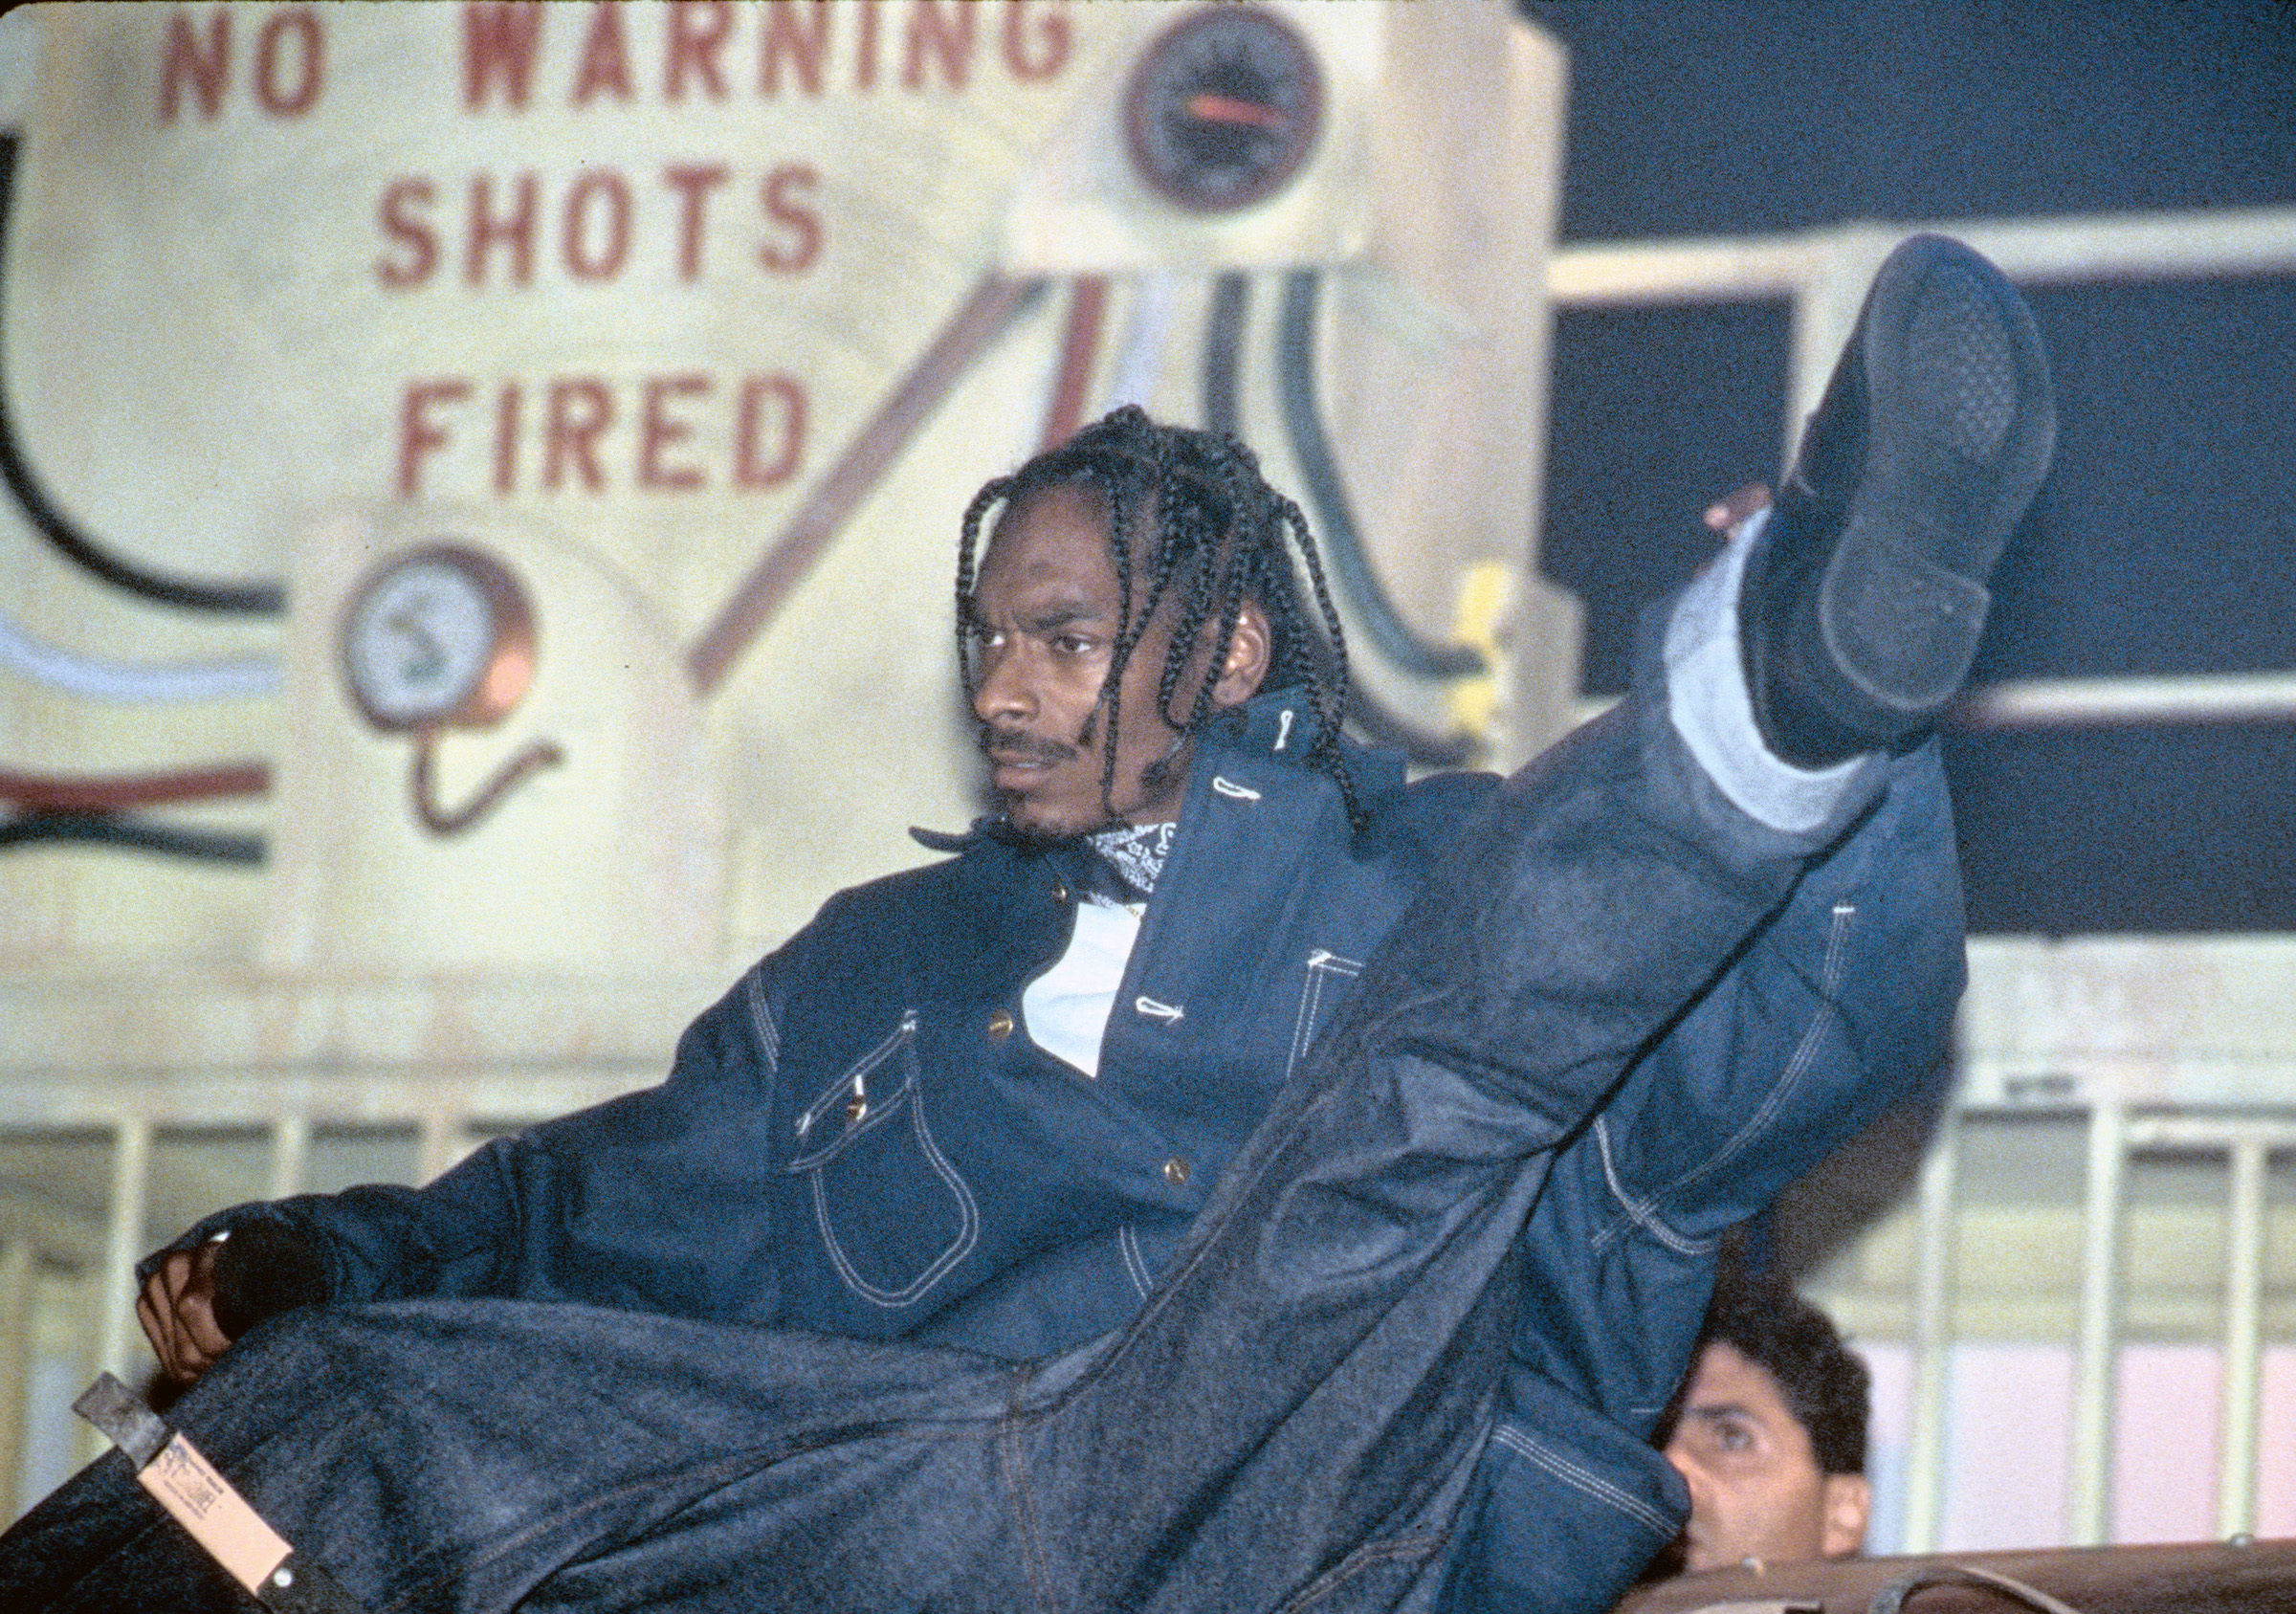 Snoop Dogg performs when the Death Row Records label assembles at The Source Awards, held at The Paramount Theater at Madison Square Garden, on August 3, 1995 in New York City.  (Al Pereira—Getty Images/Michael Ochs Archives)